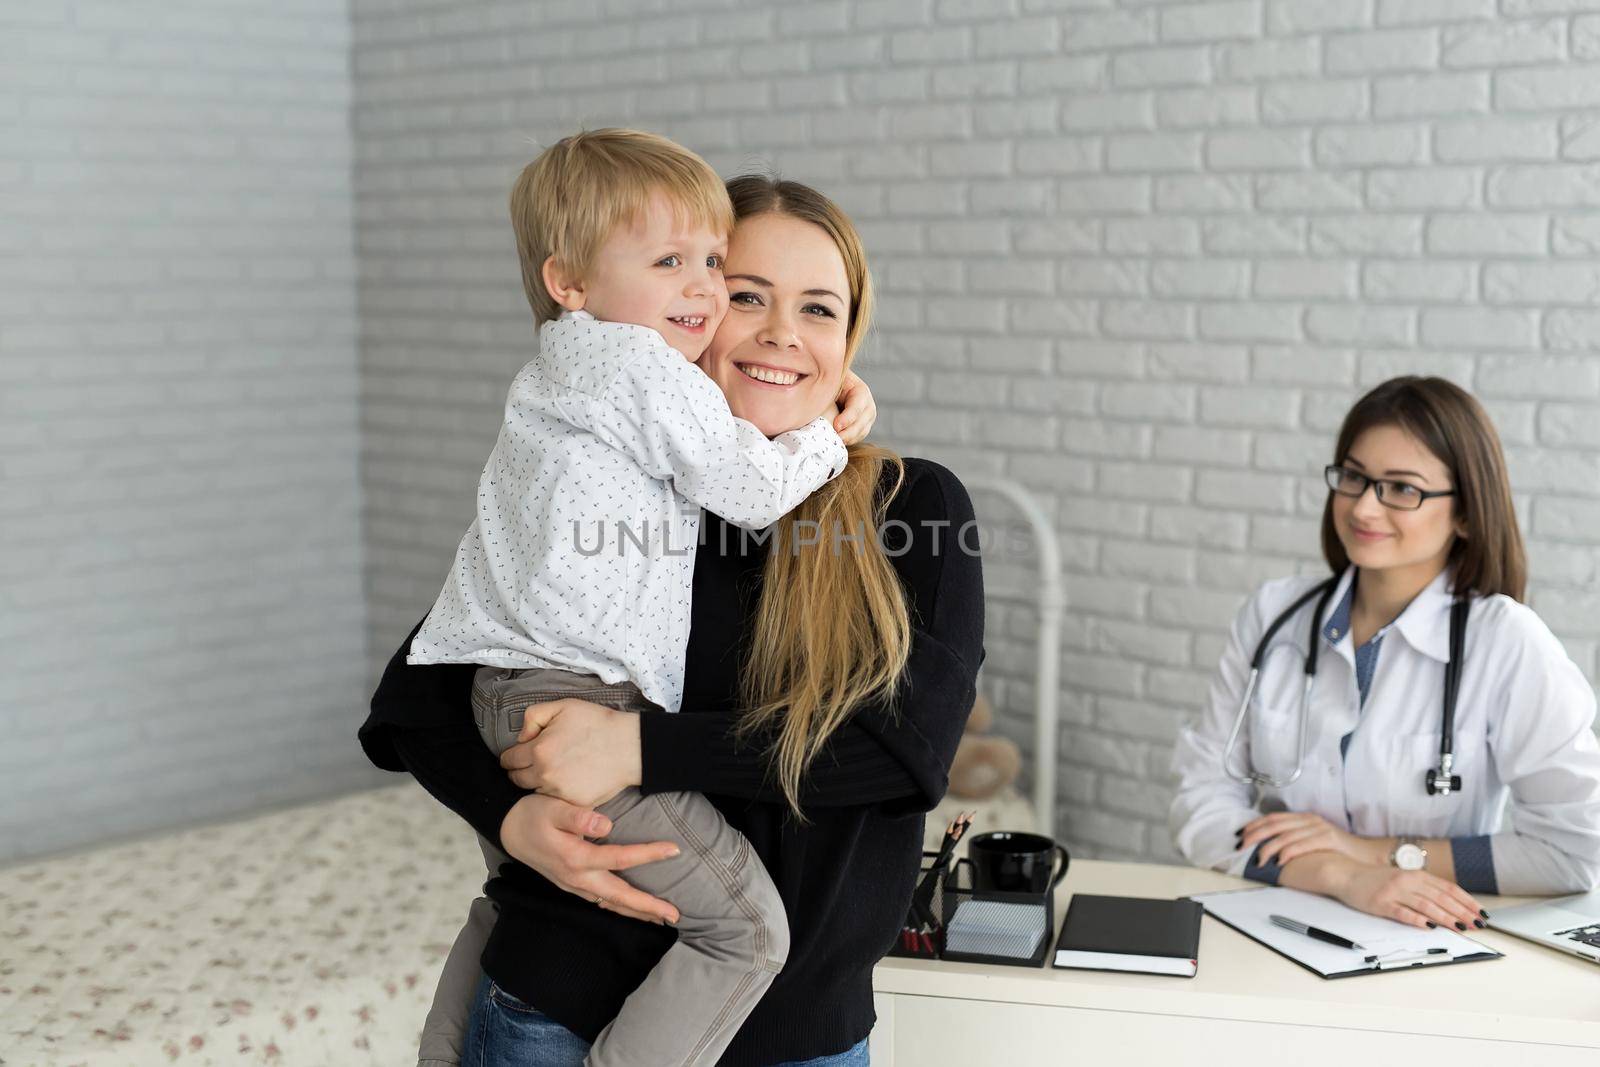 Portrait of mother and child at a doctor's appointment. Pediatrician meeting with mother and child in hospital.